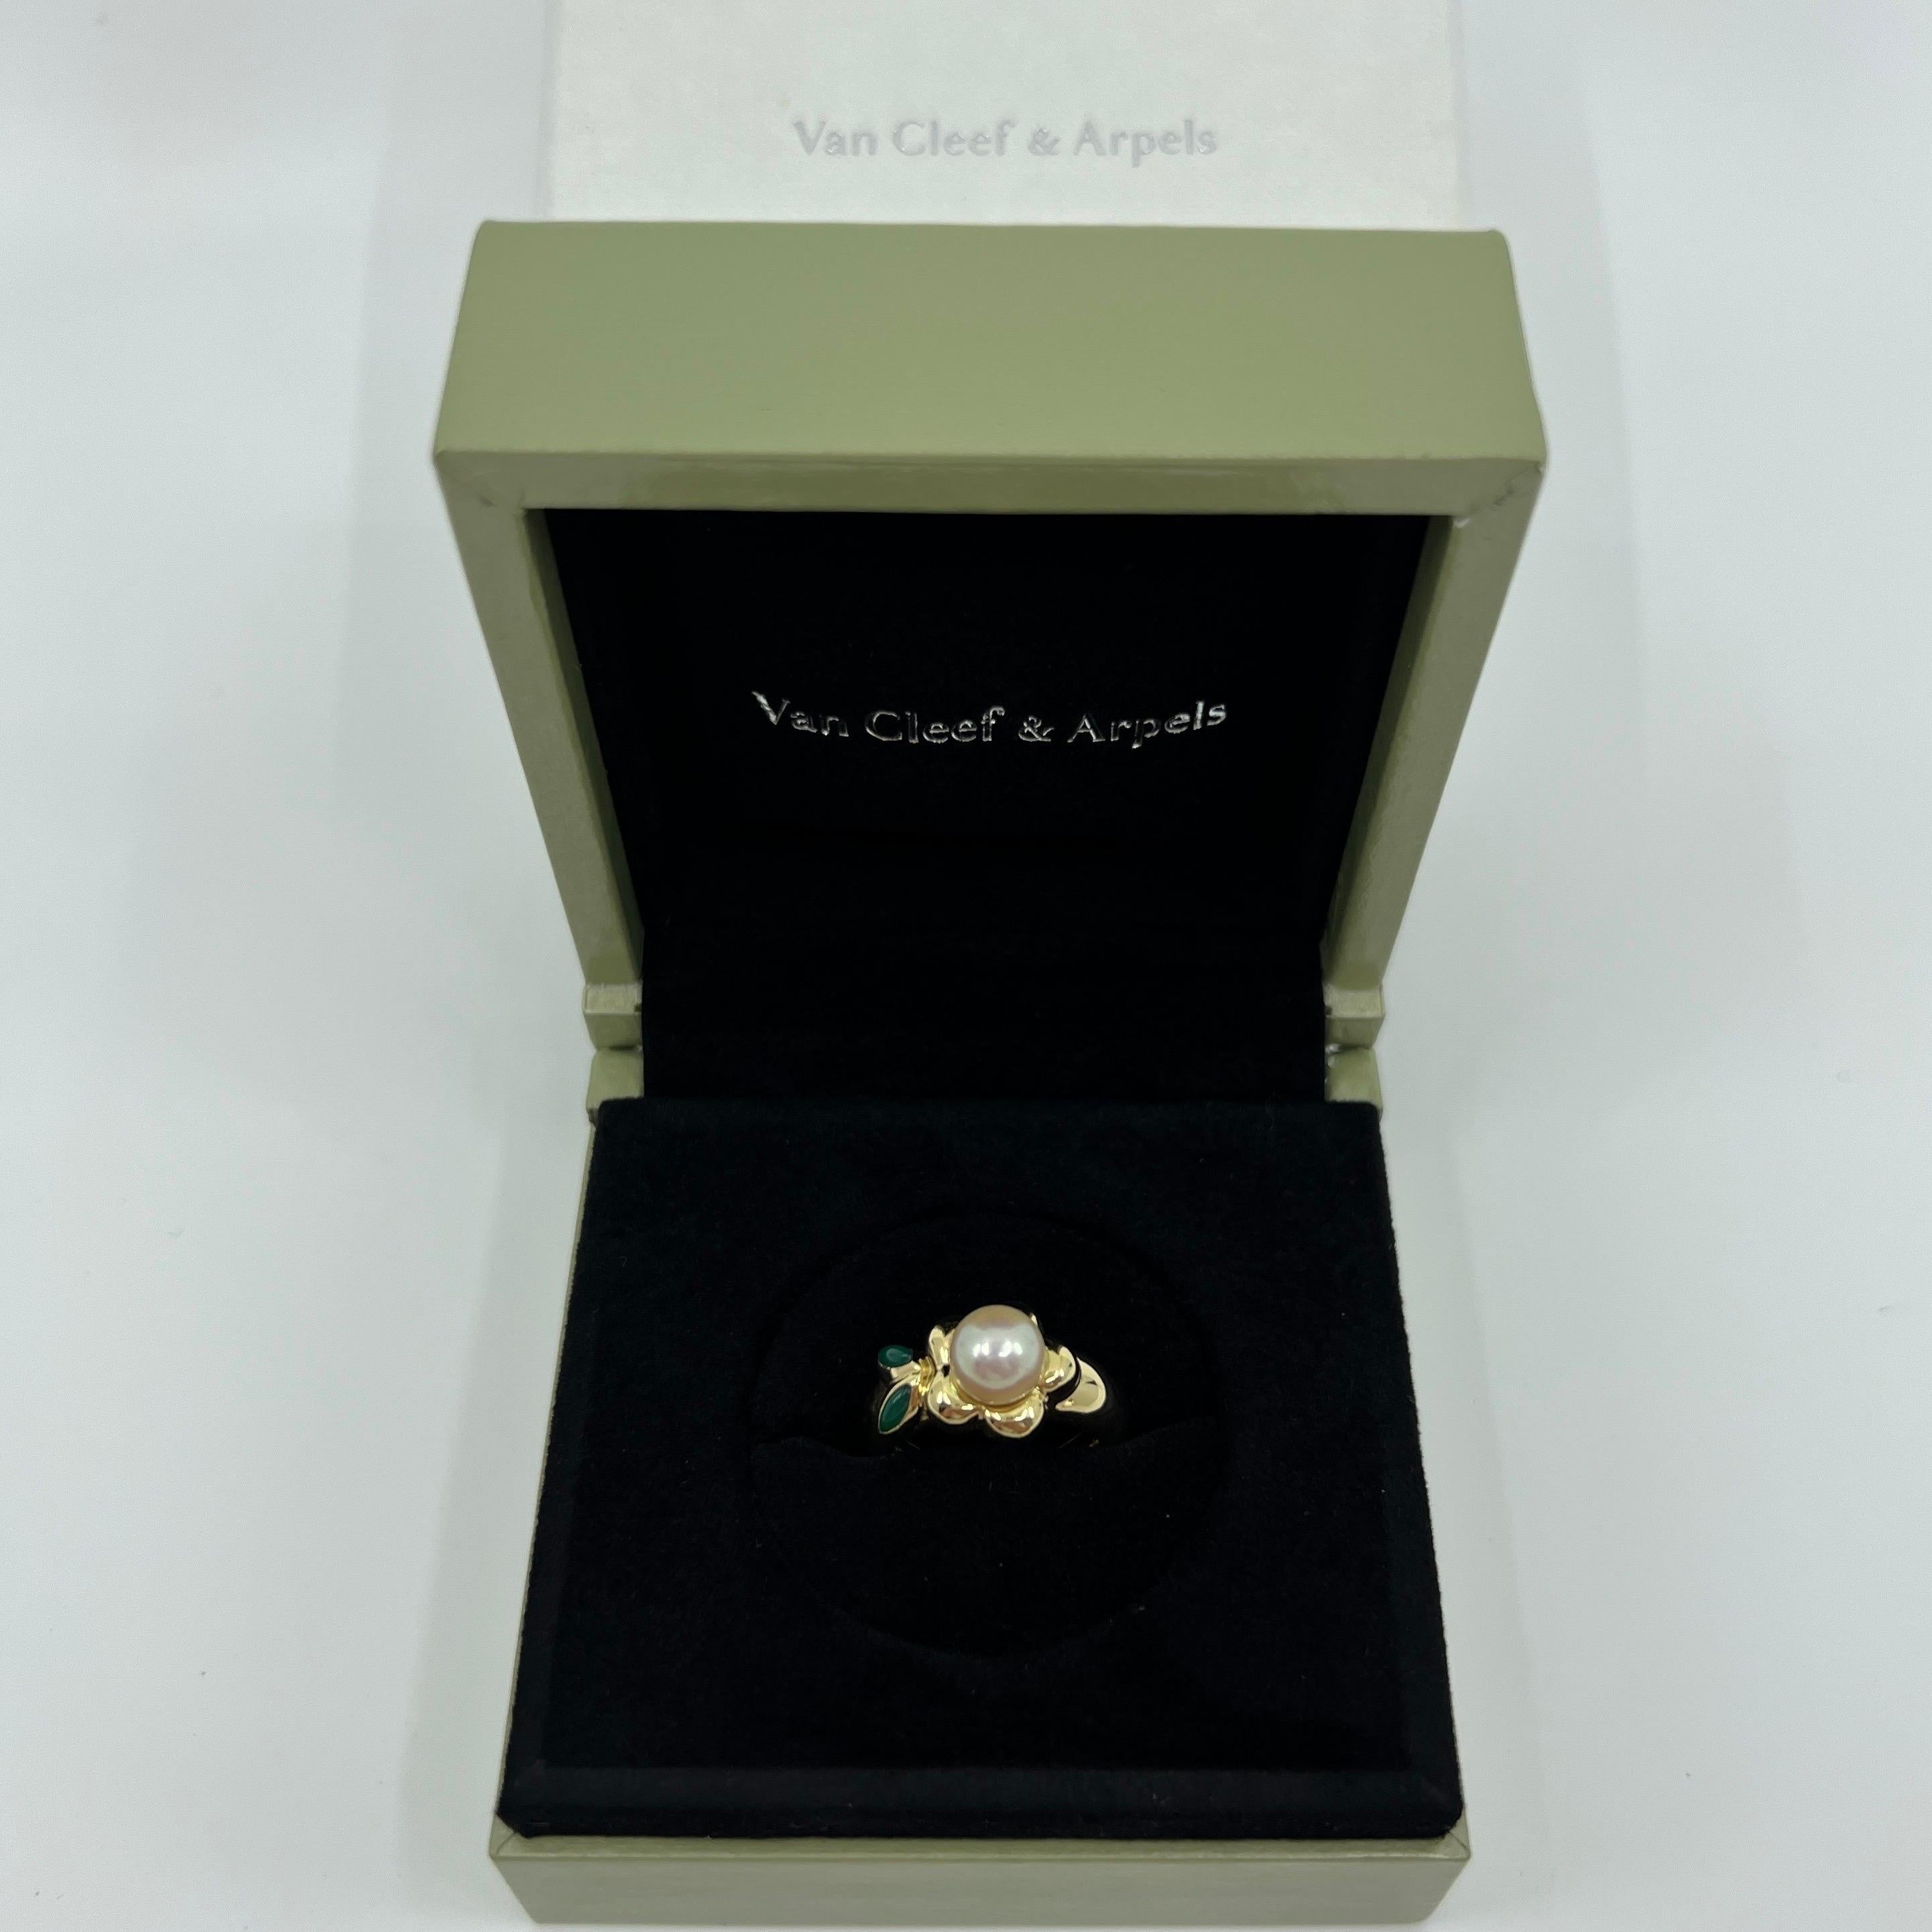 Rare Vintage Van Cleef & Arpels 18 Karat Yellow Gold Pearl And Chalcedony Flower Ring.

A stunning vintage Van Cleef & Arpels ring with a flower motif typical of VCA designs. Featuring an excellent quality 6.5mm white cultured pearl and green